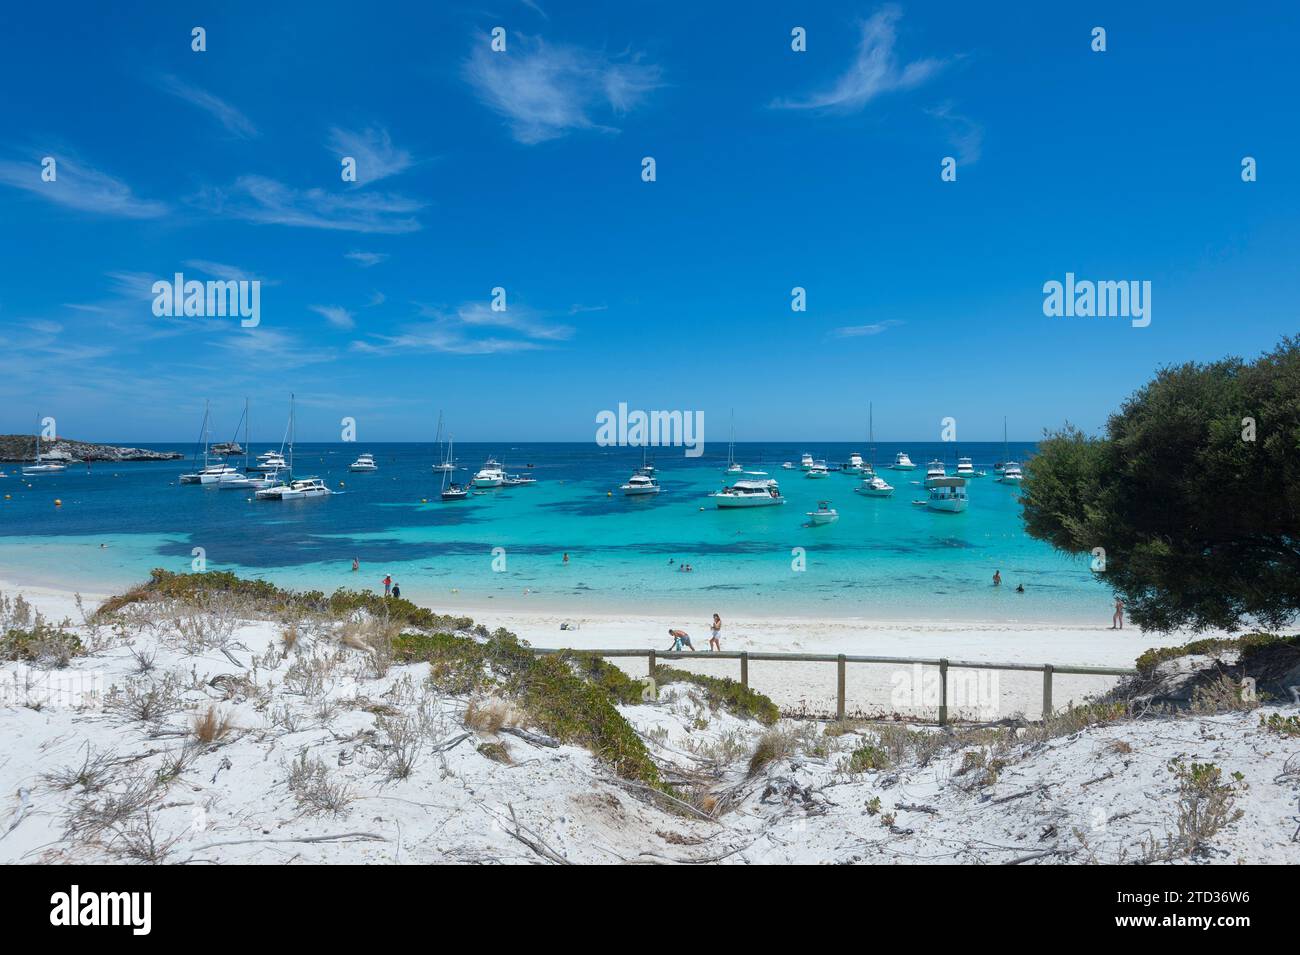 Yachts anchored in turquoise waters on an idyllic beach of the Indian Ocean, Rottnest Island or Wadjemup, Western Australia, Australia Stock Photo